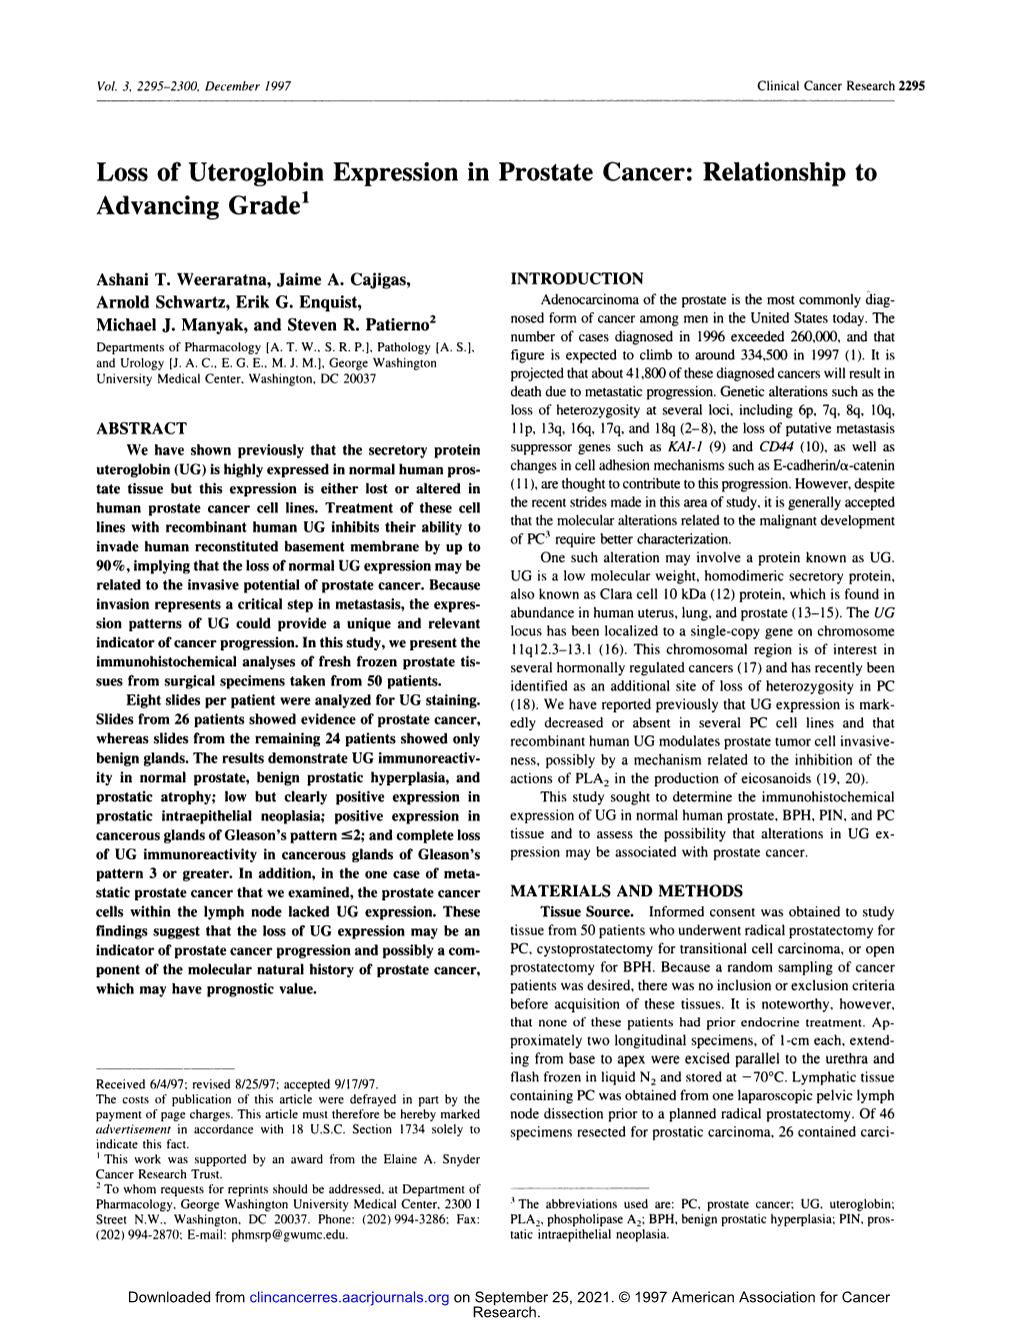 Loss of Uteroglobin Expression in Prostate Cancer: Relationship to Advancing Grade1